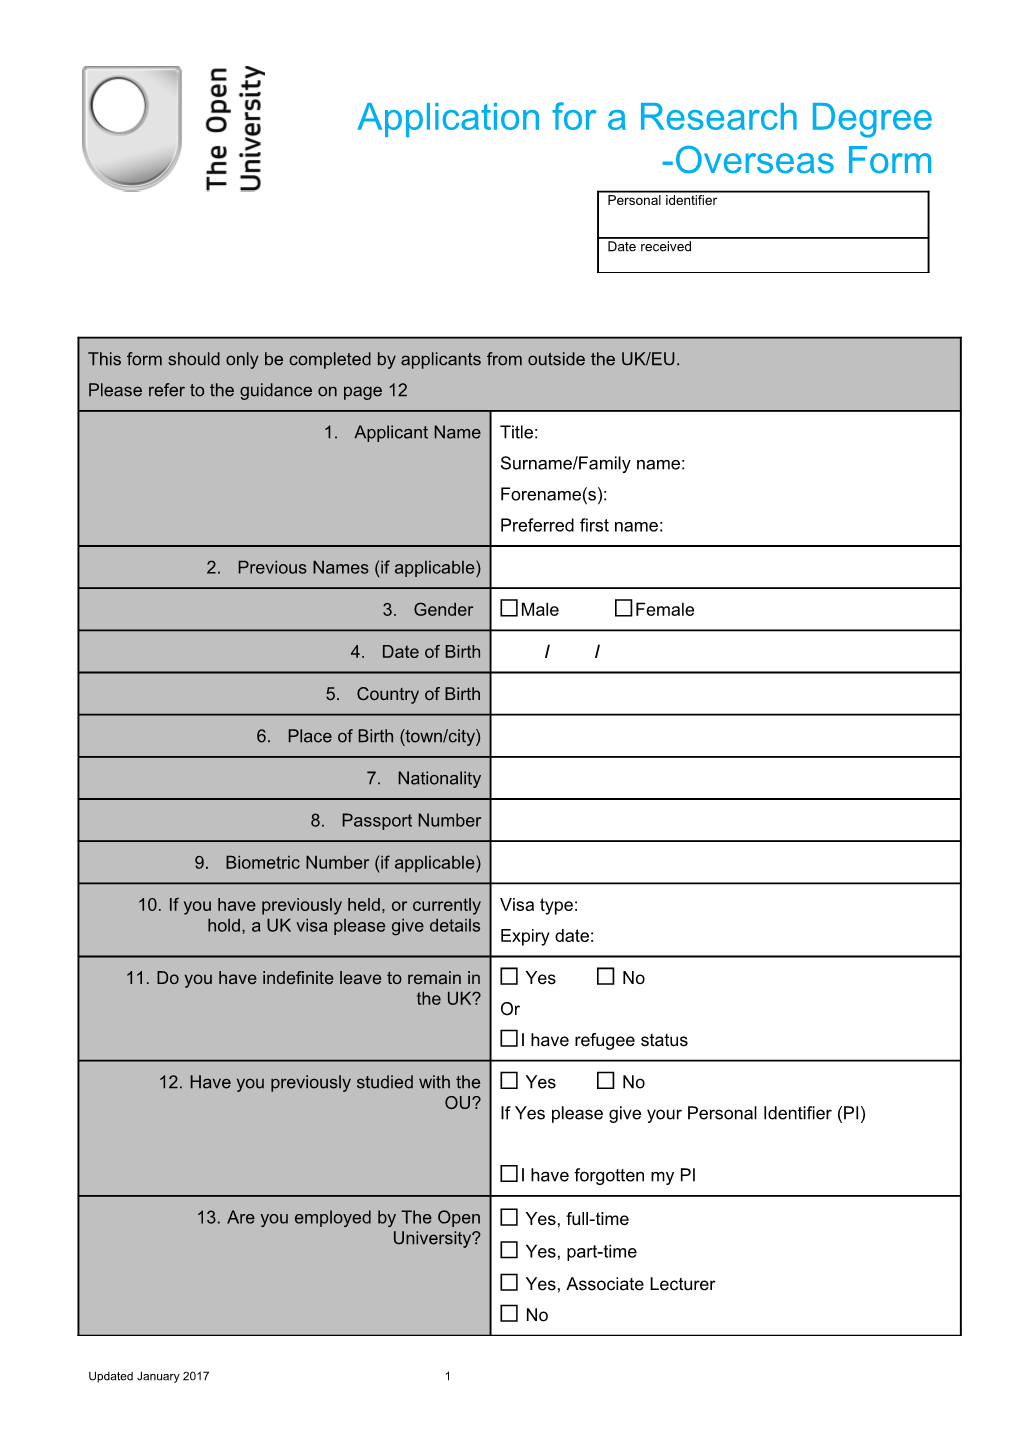 Application for a Research Degree -Overseas Form